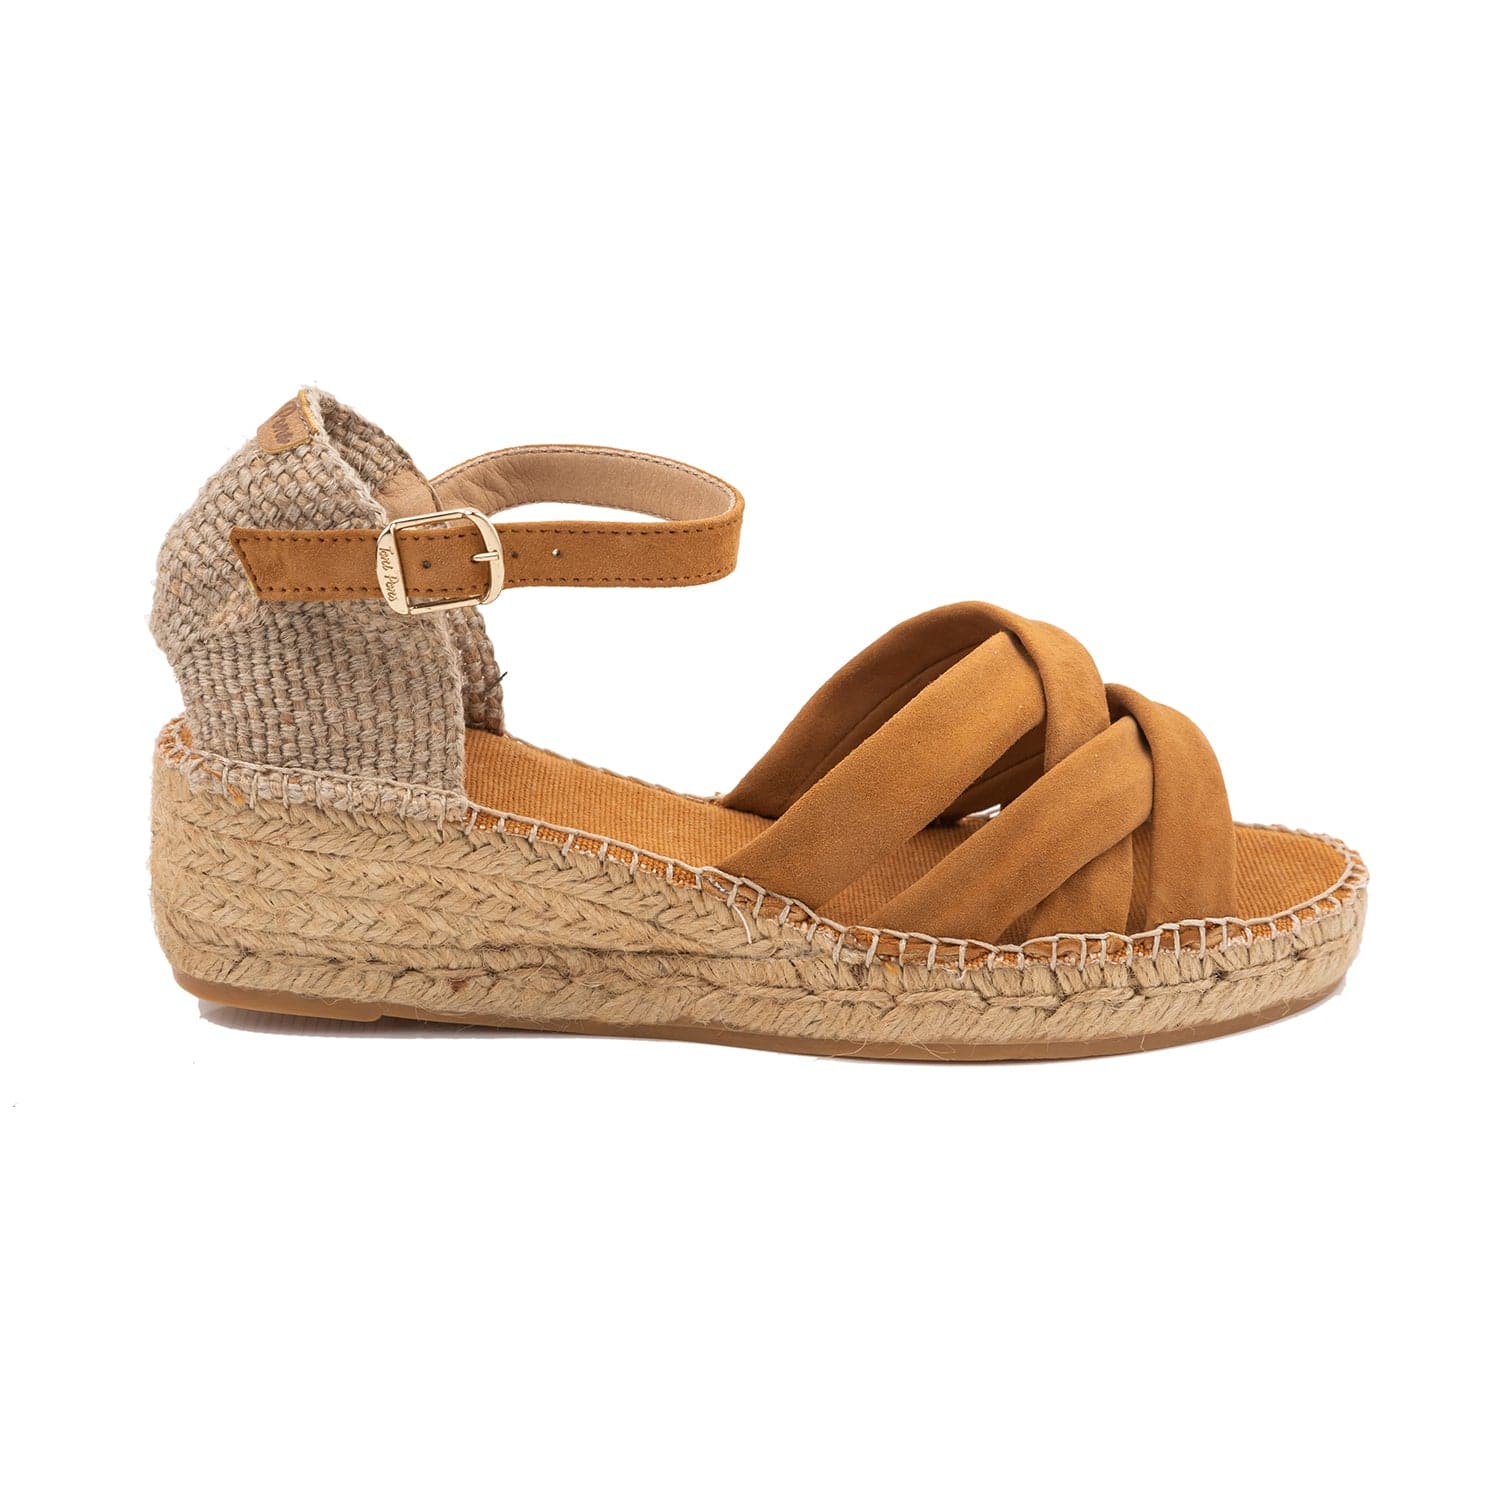 Plain Suede Leather Wedge Espadrille for Women - Buma-A